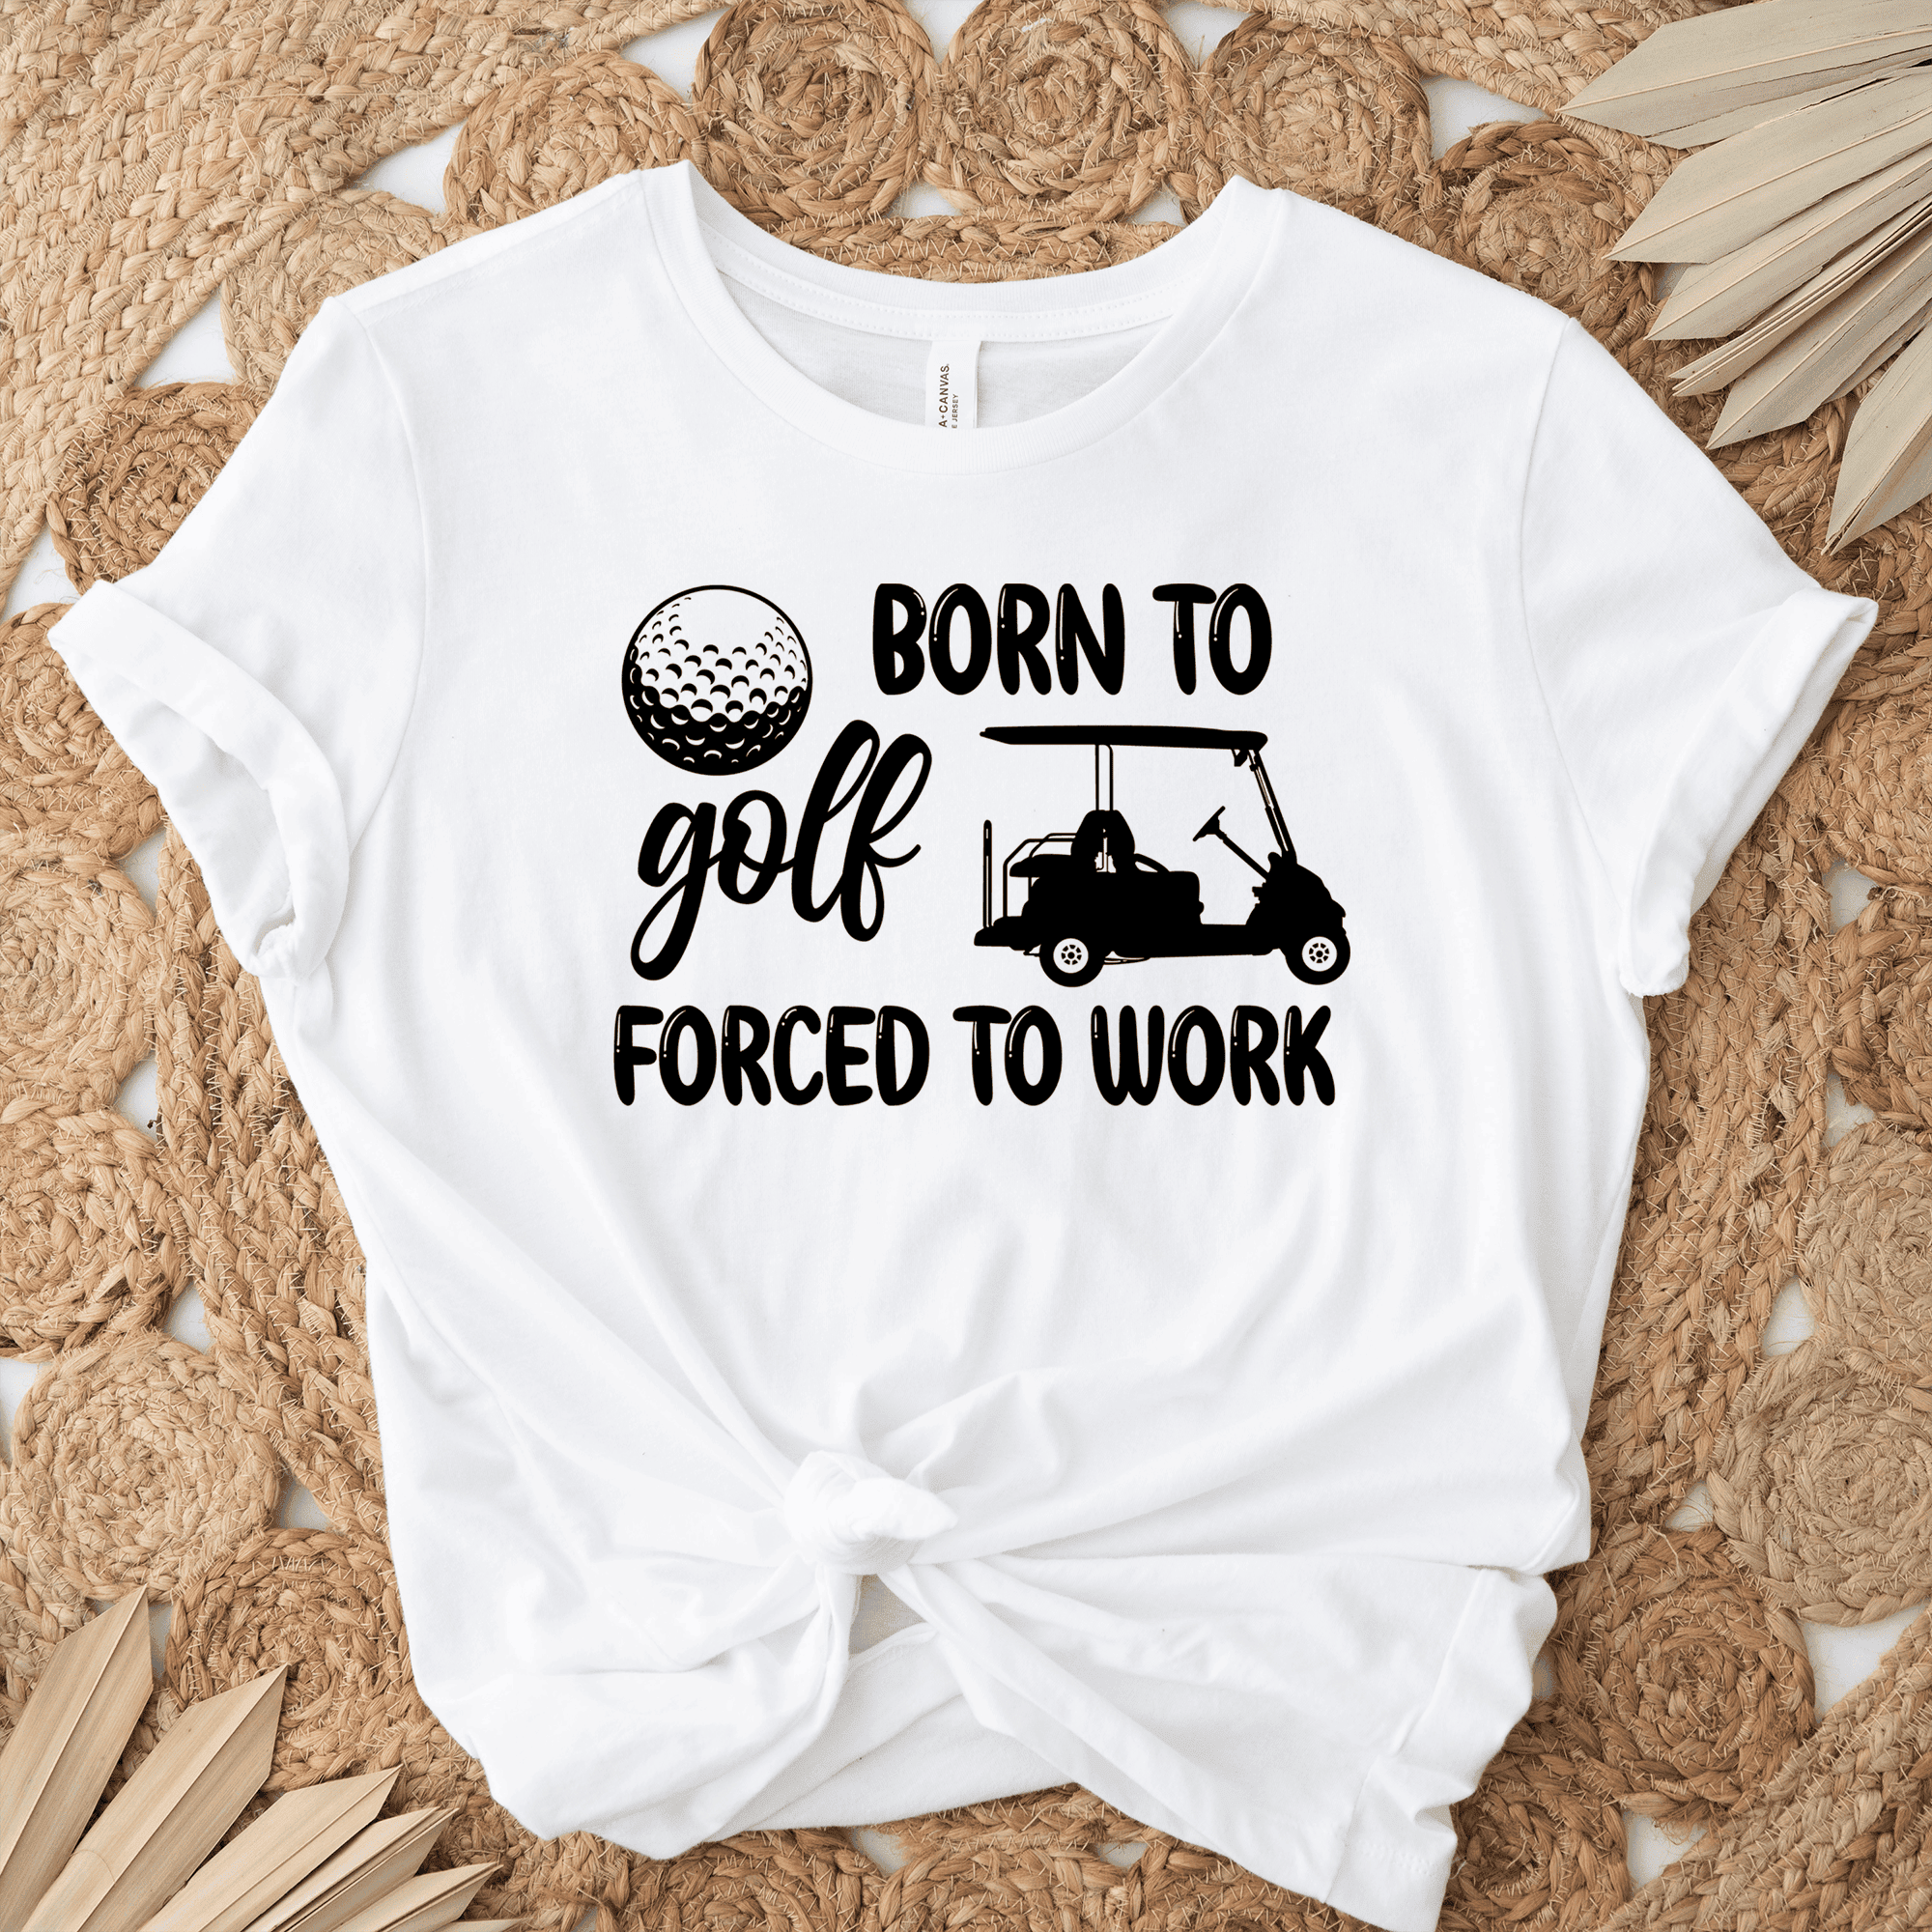 Womens White T Shirt with Never-Meant-To-Work design